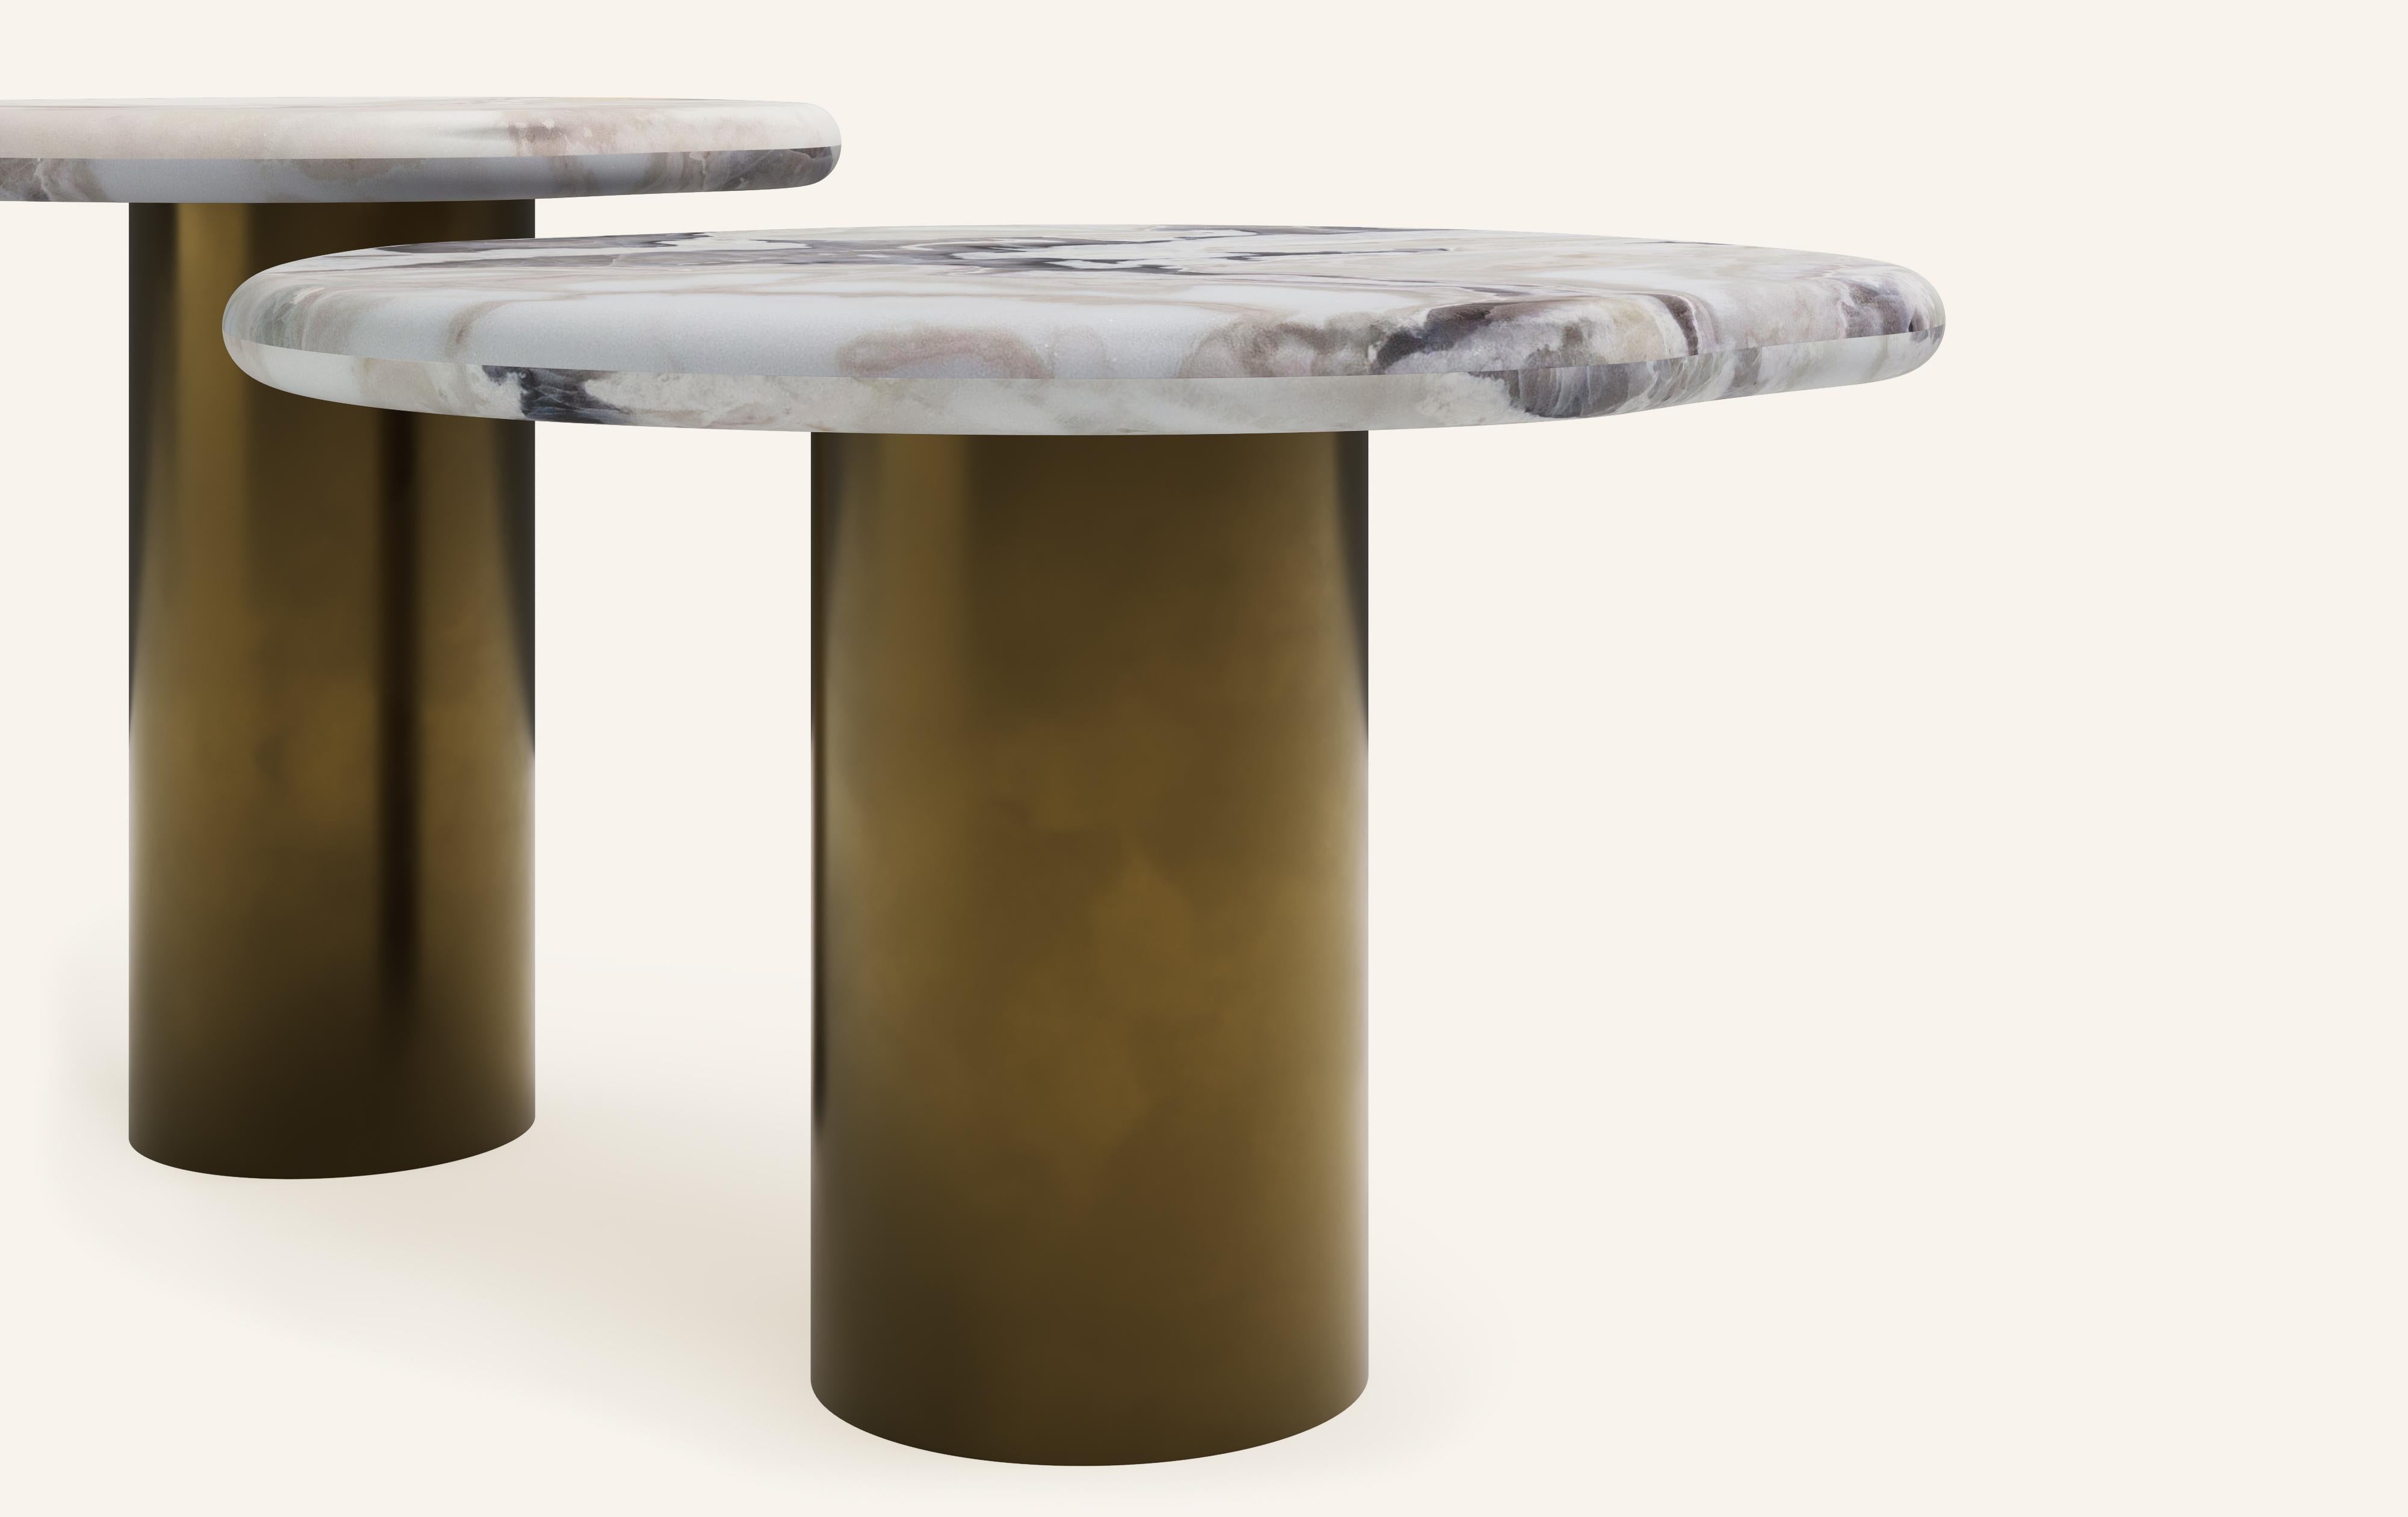 Organic Modern FORM(LA) Lago Round Side Table 18”L x 18”W x 18”H Oyster Marble & Antique Bronze For Sale